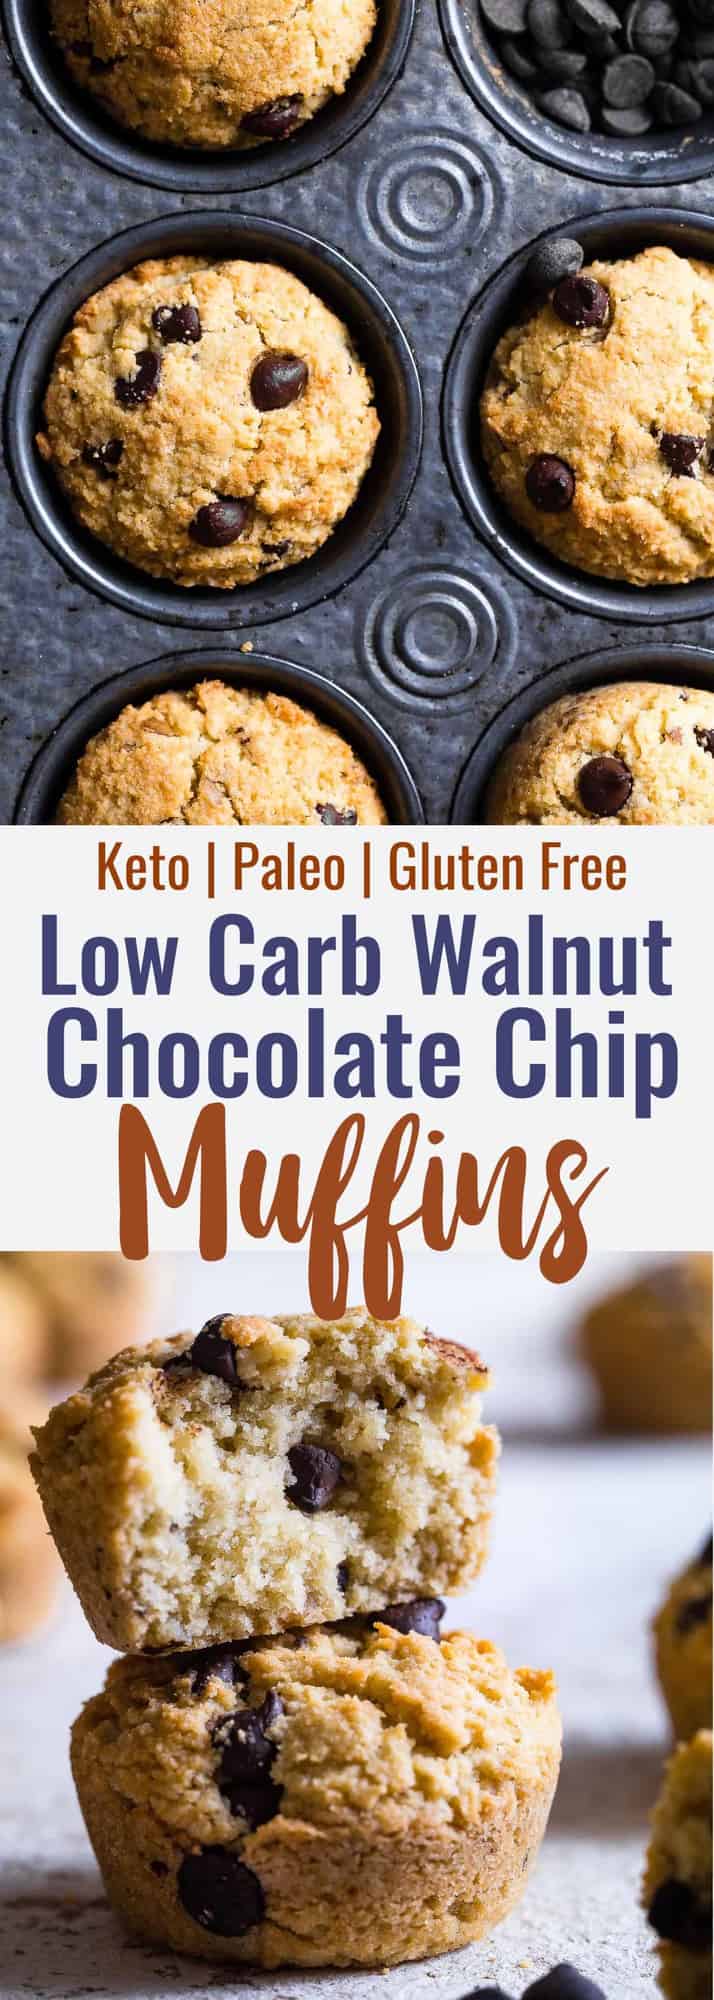 Walnut Chocolate Chip Keto Low Carb Muffins - These healthy, sugar free muffins are loaded with chocolate chips and black walnuts and are SO moist and fluffy you won't believe they're gluten free, keto AND paleo! | #Foodfaithfitness | #Keto #Lowcarb #Glutenfree #Paleo #Grainfree